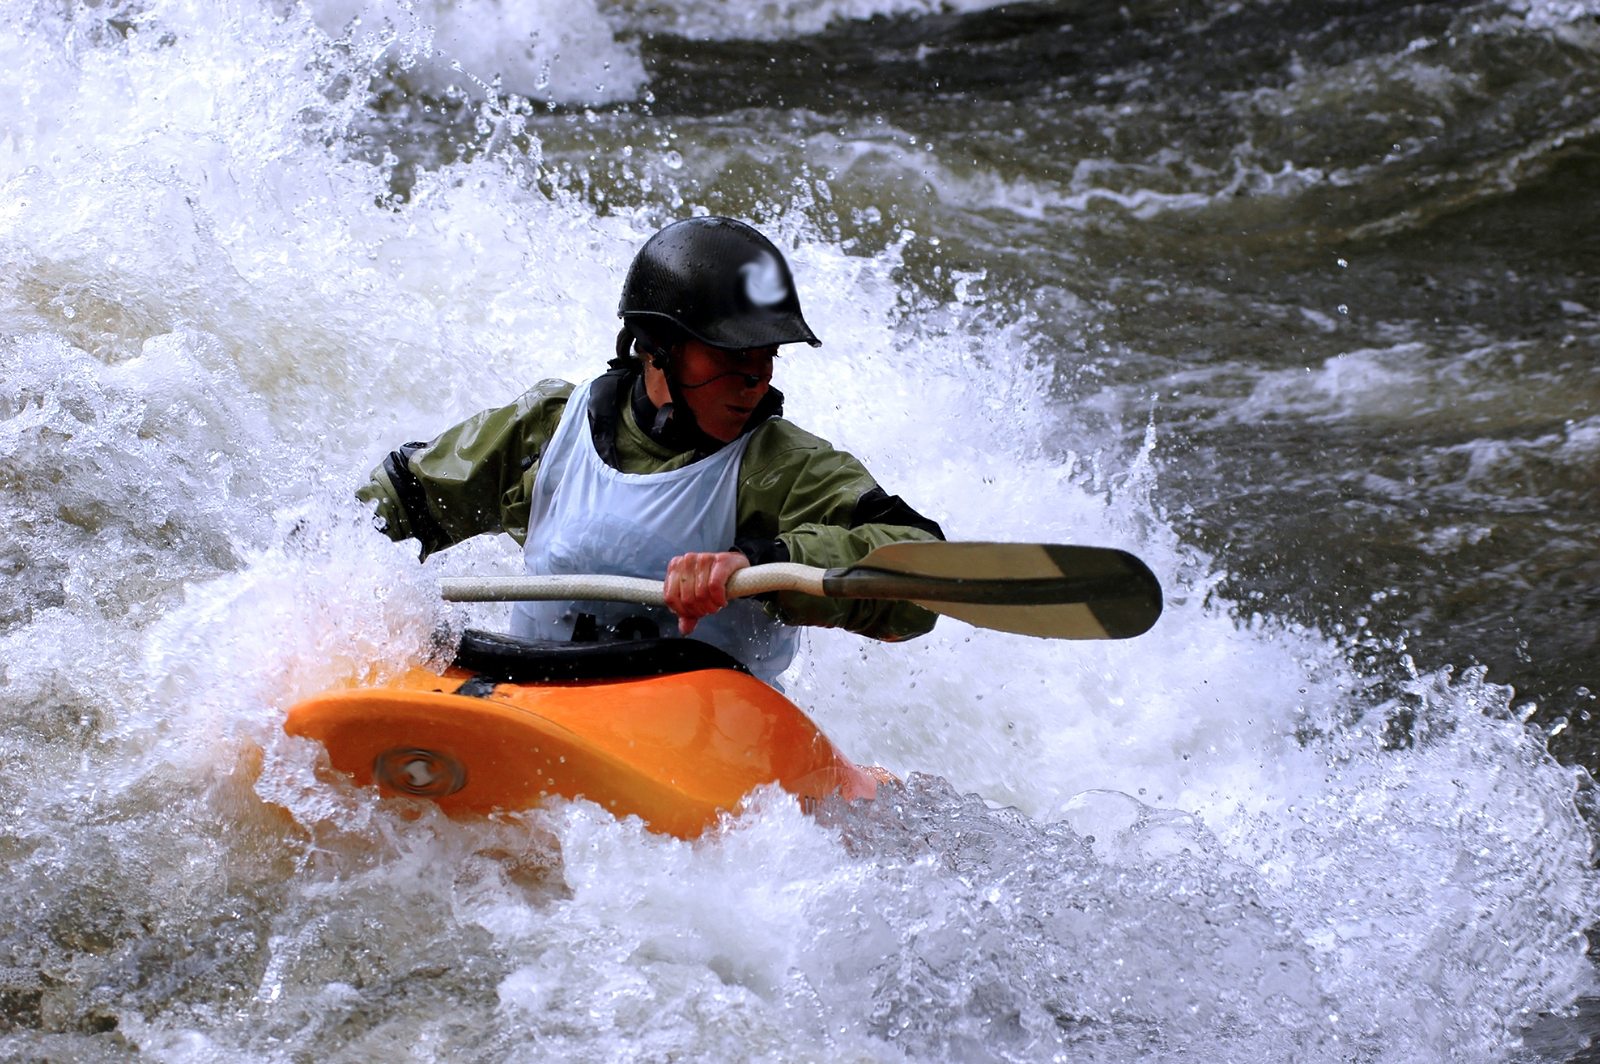 female kayak play boat competitor surfing river wave